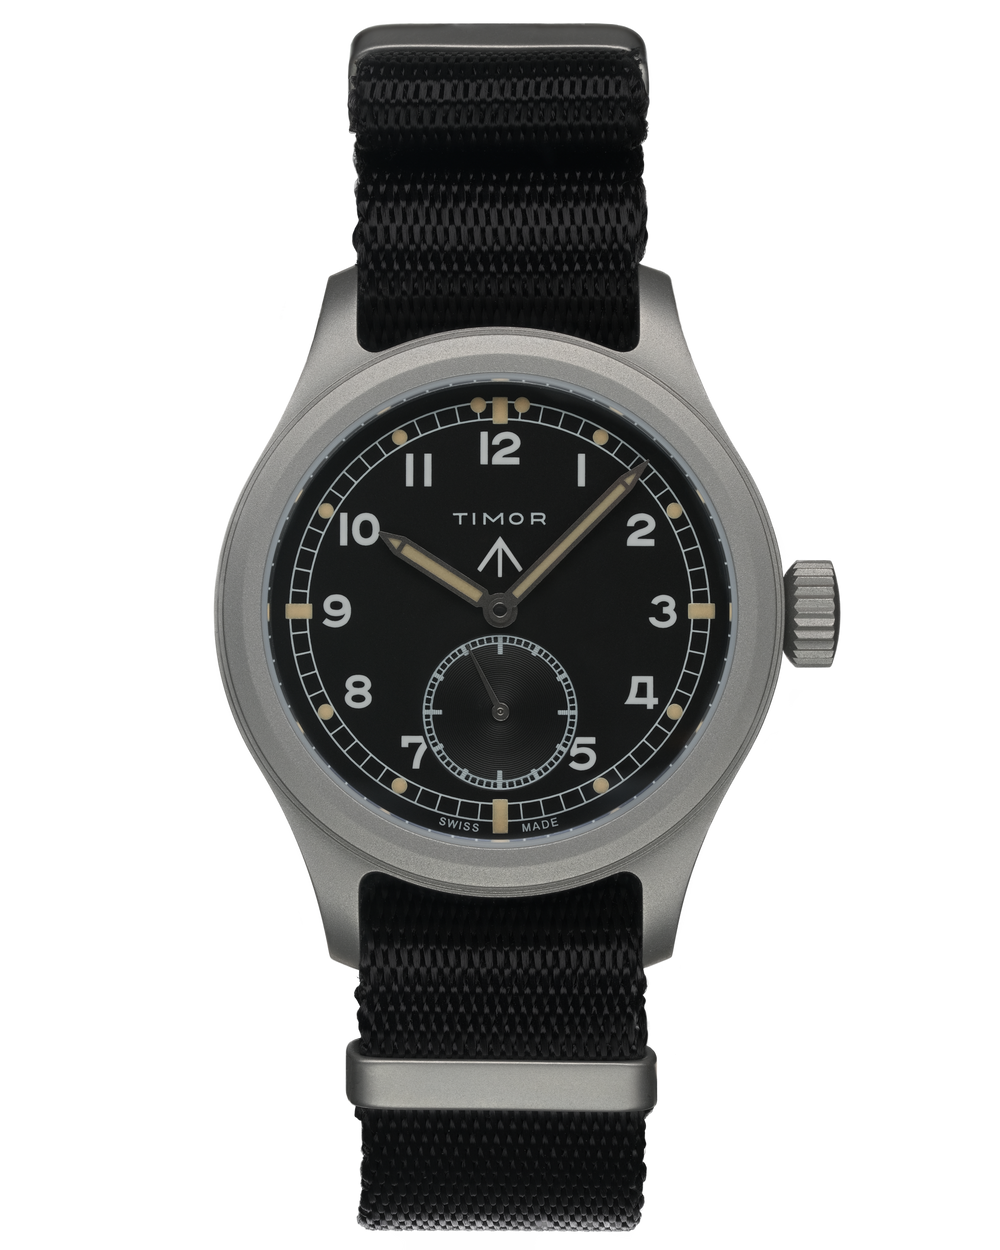 Military style Reissue watches | BladeForums.com